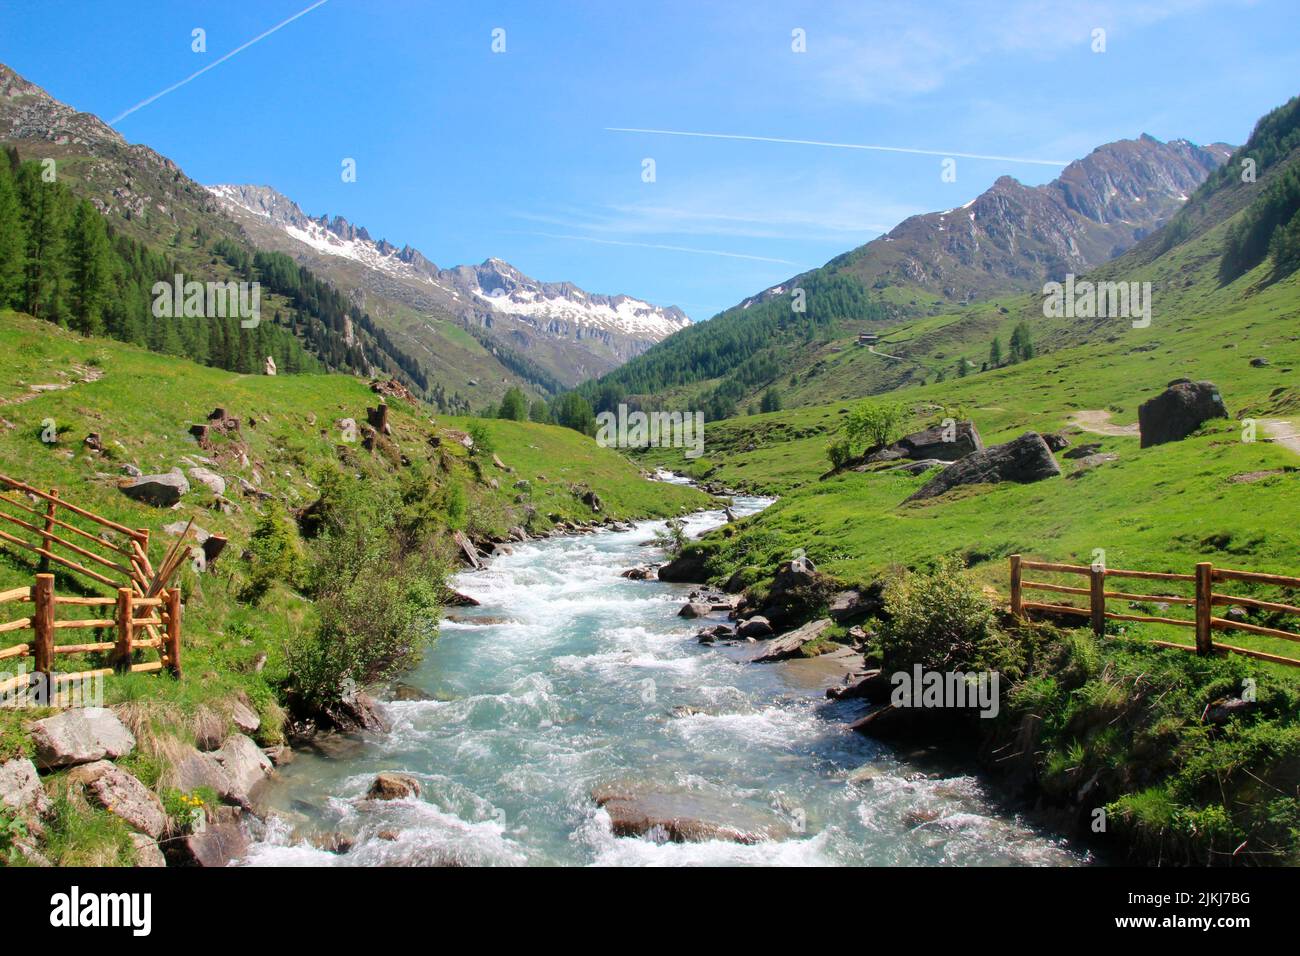 The mountain stream the Ahr in Prettau in the Ahrntal, province of Bolzano, Pustertal, South Tyrol, Italy Stock Photo